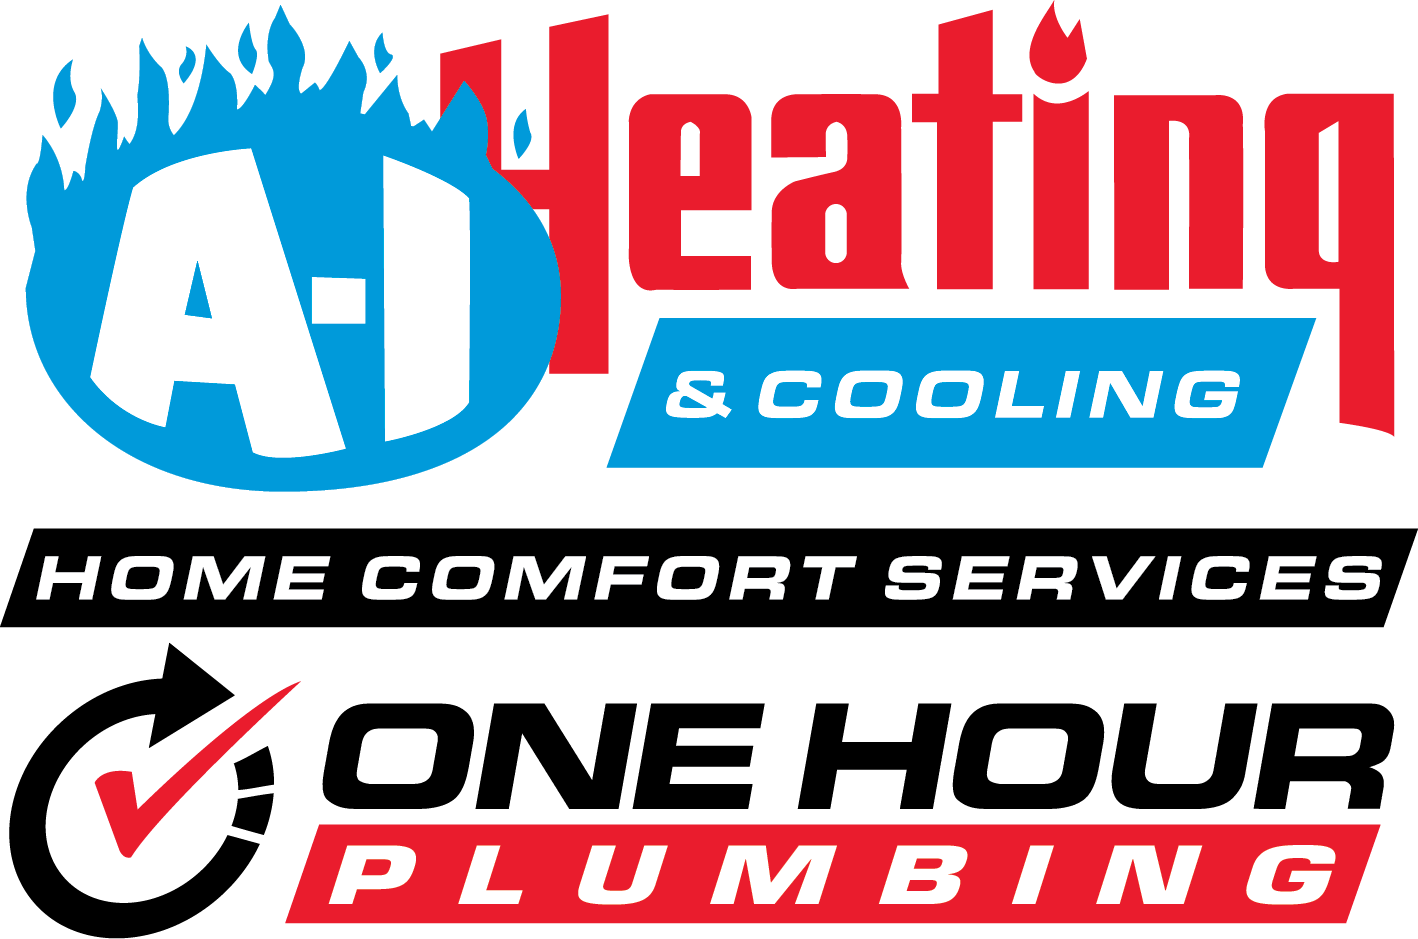 A1-Heating and 1hour plumbing